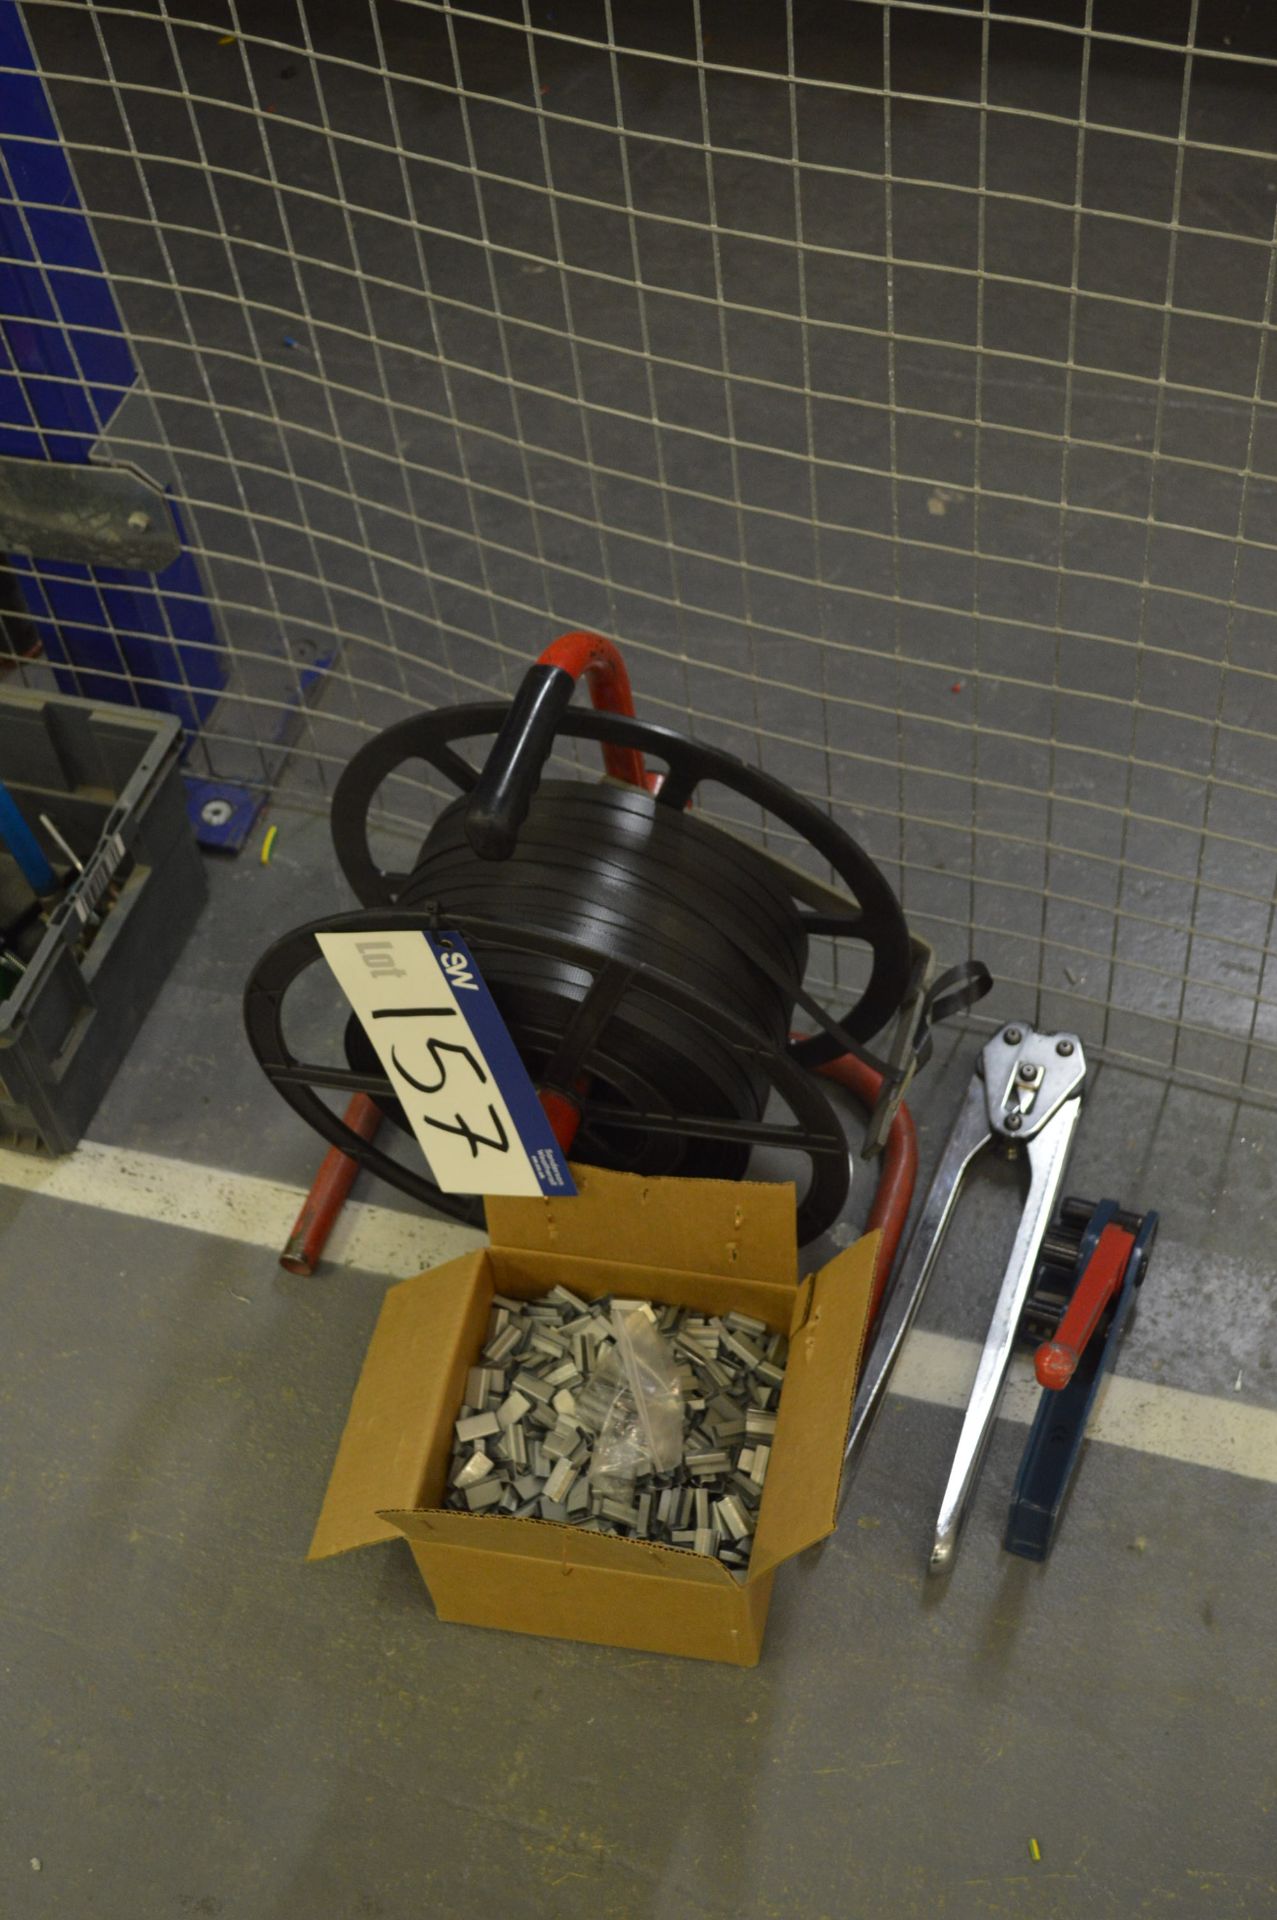 Strap Banding Tool & Equipment, as set out